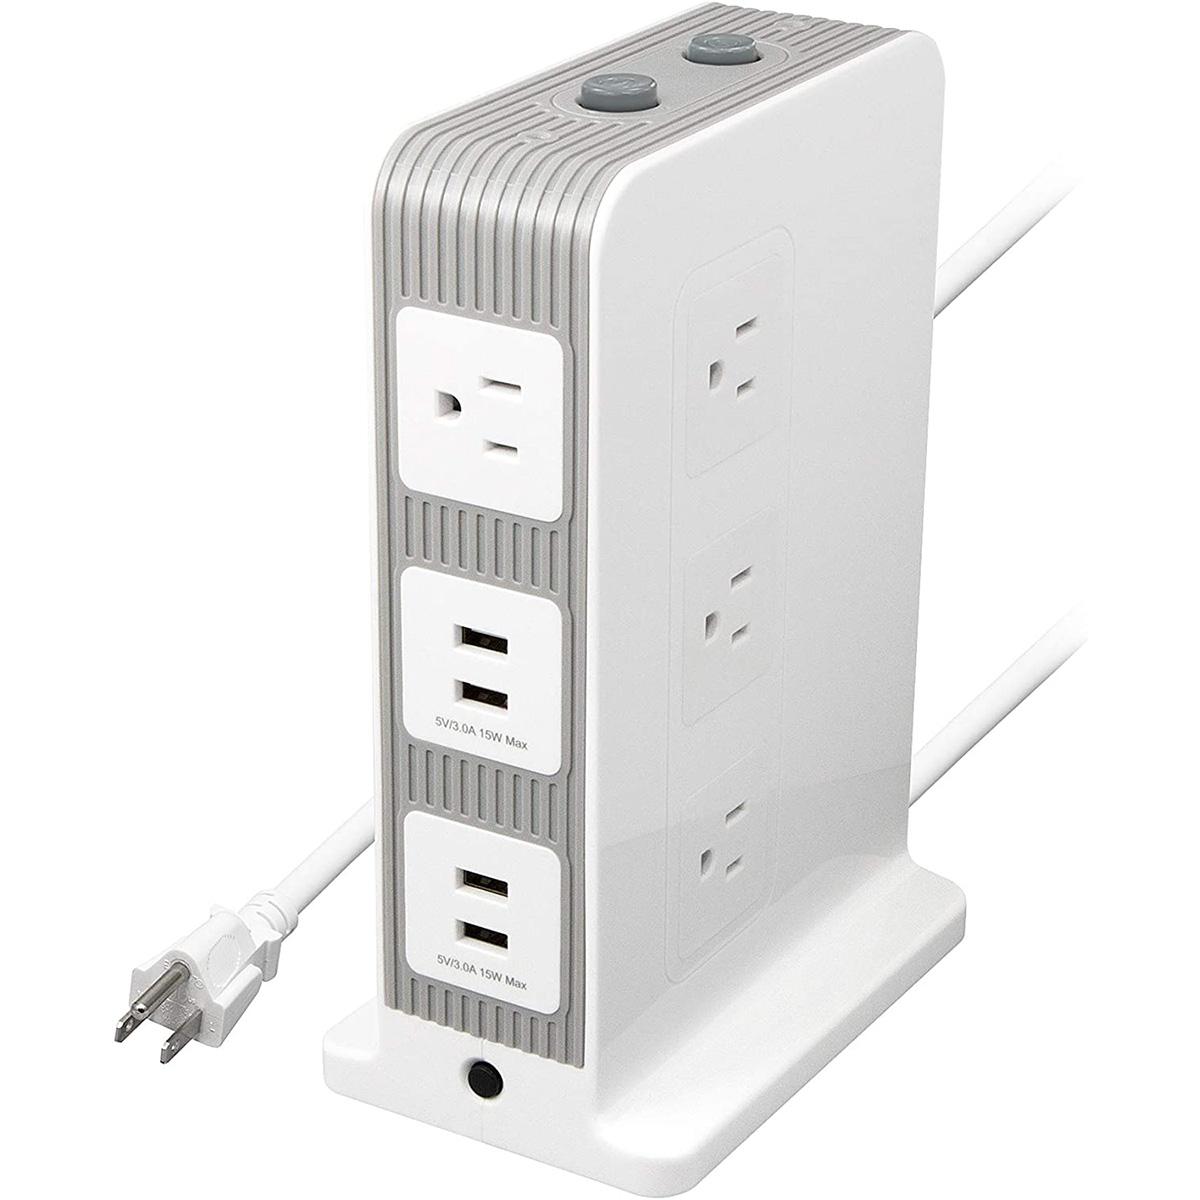 Rosewill 10-Outlet and 4 USB Port 1000 Joules Tower Surge Protector for $24.99